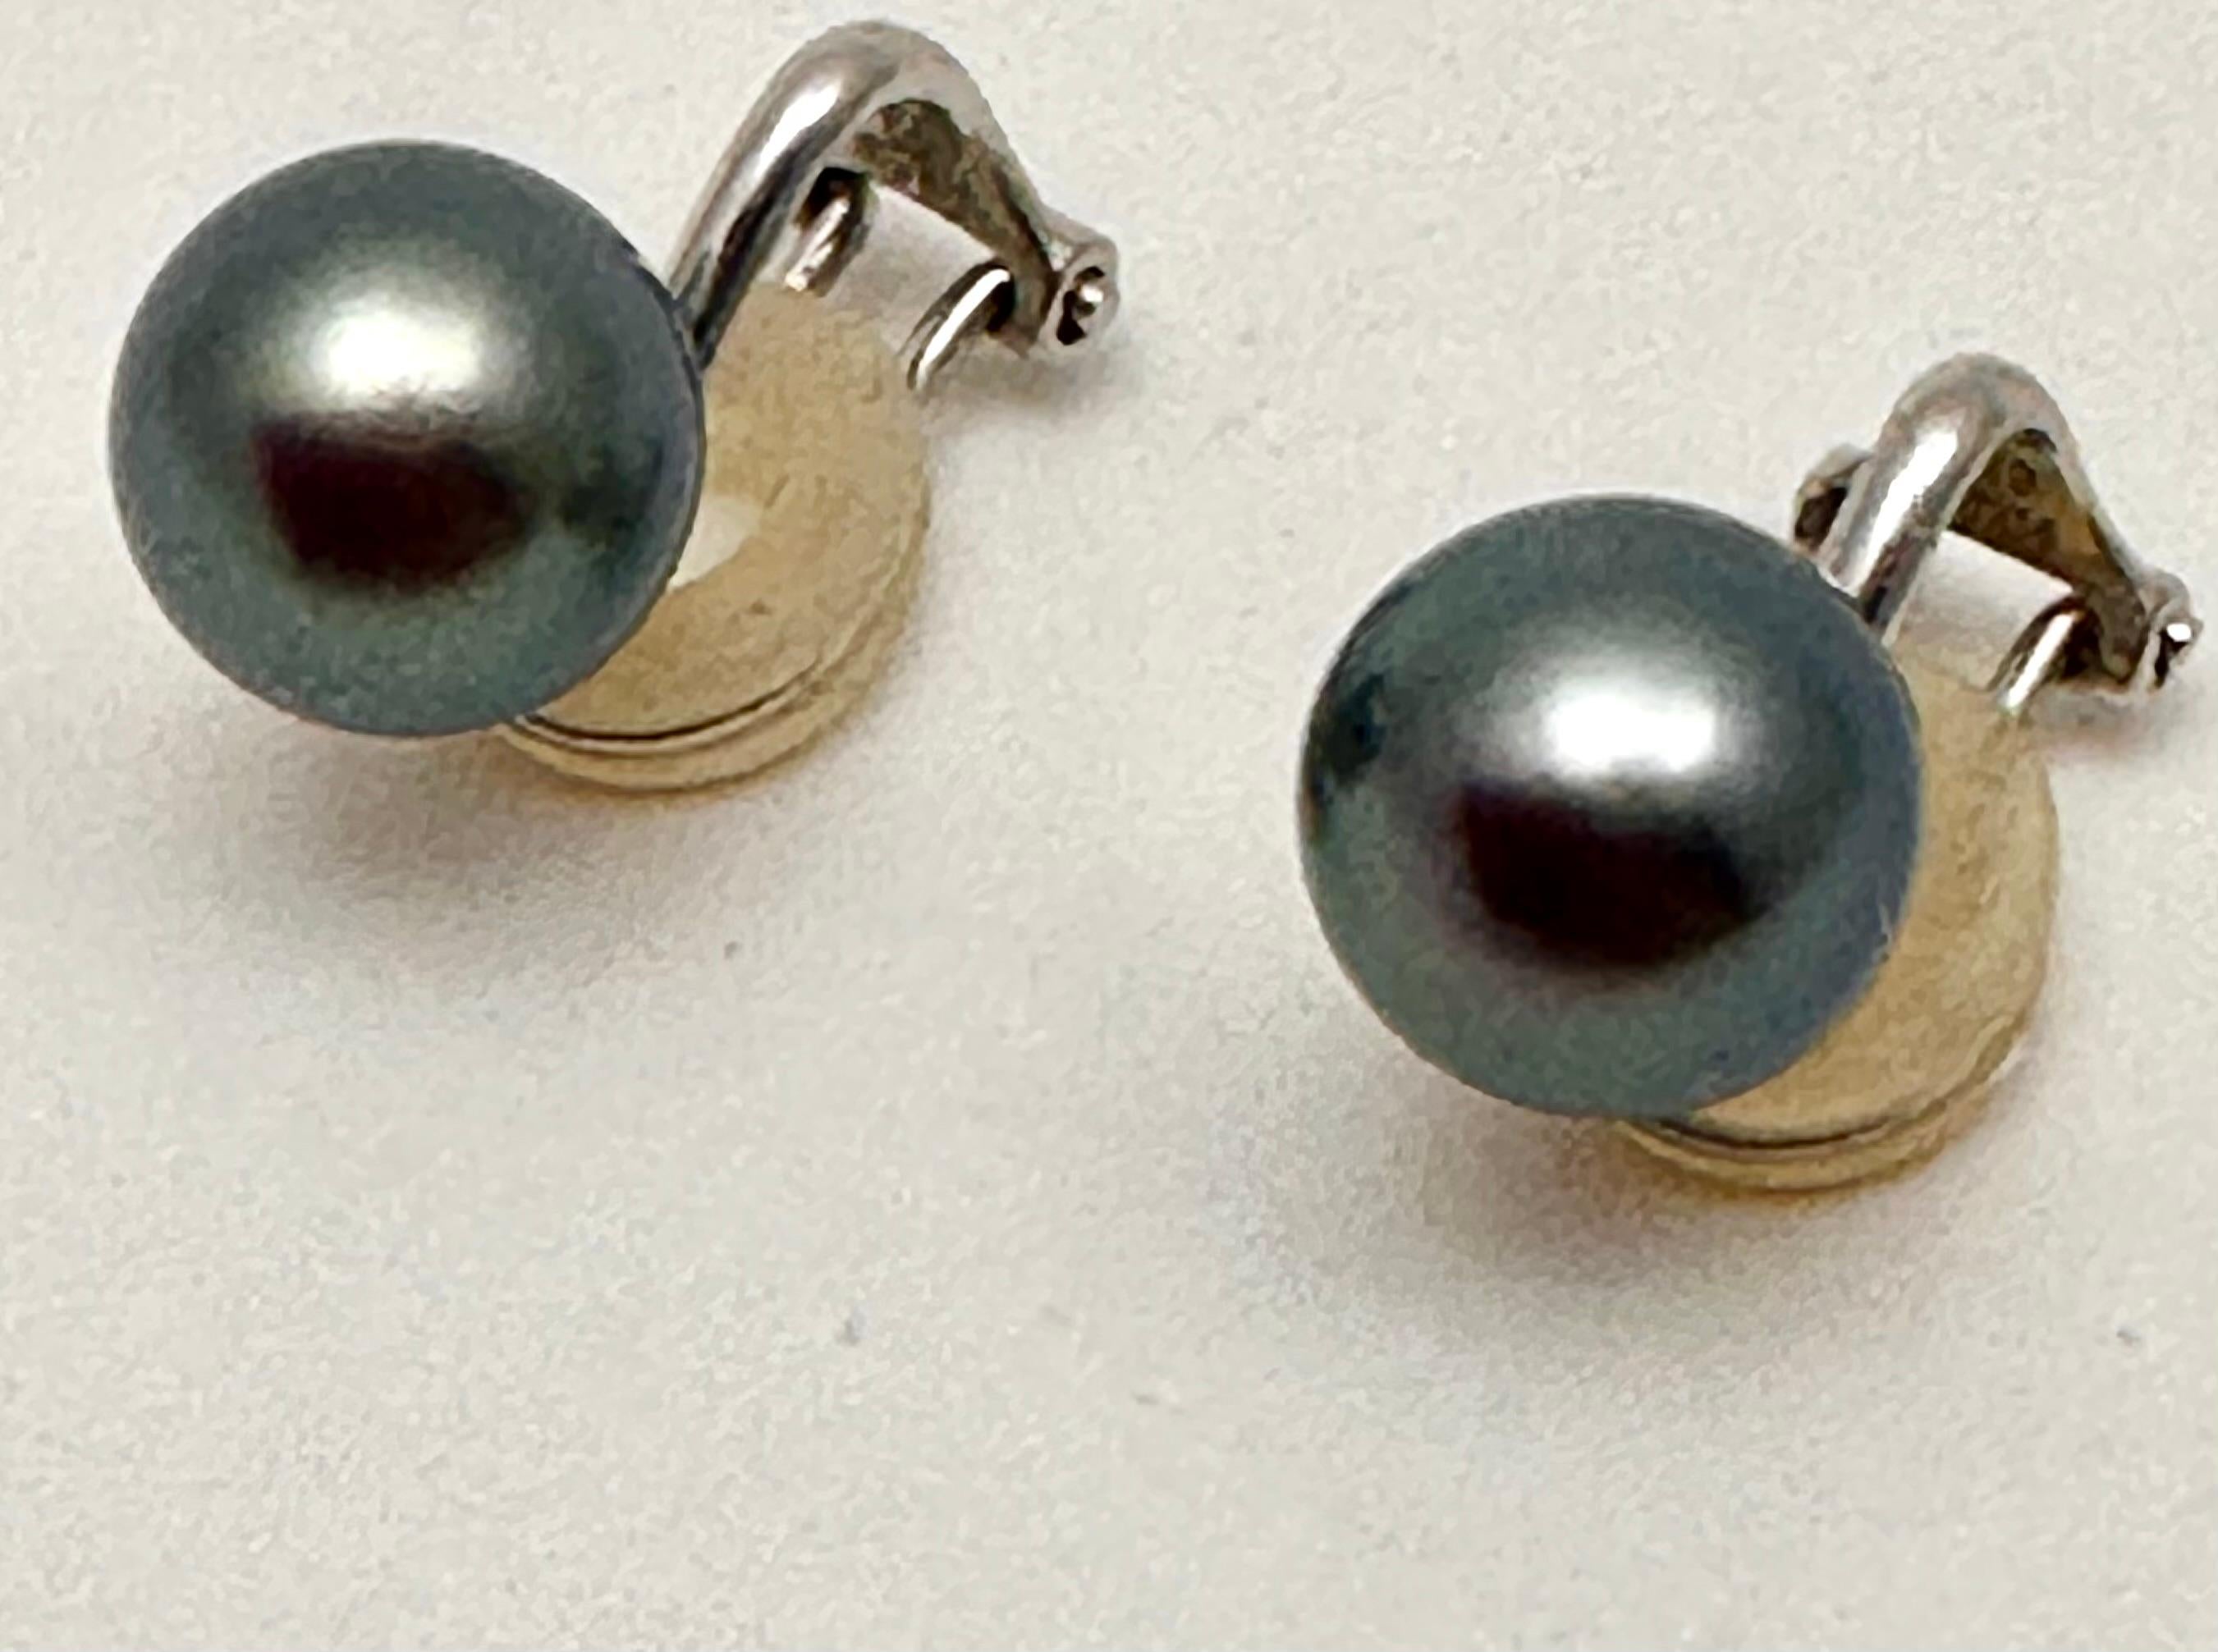 18k White Gold 9.5mm Round Gray Tahitian Pearl Clip On Earrings
These classic 9.5 mm pearl stud earrings are available for non-pierced ears in this elegant design. The clip-on setting features a comfortable omega-back of 18-karat  white gold. The